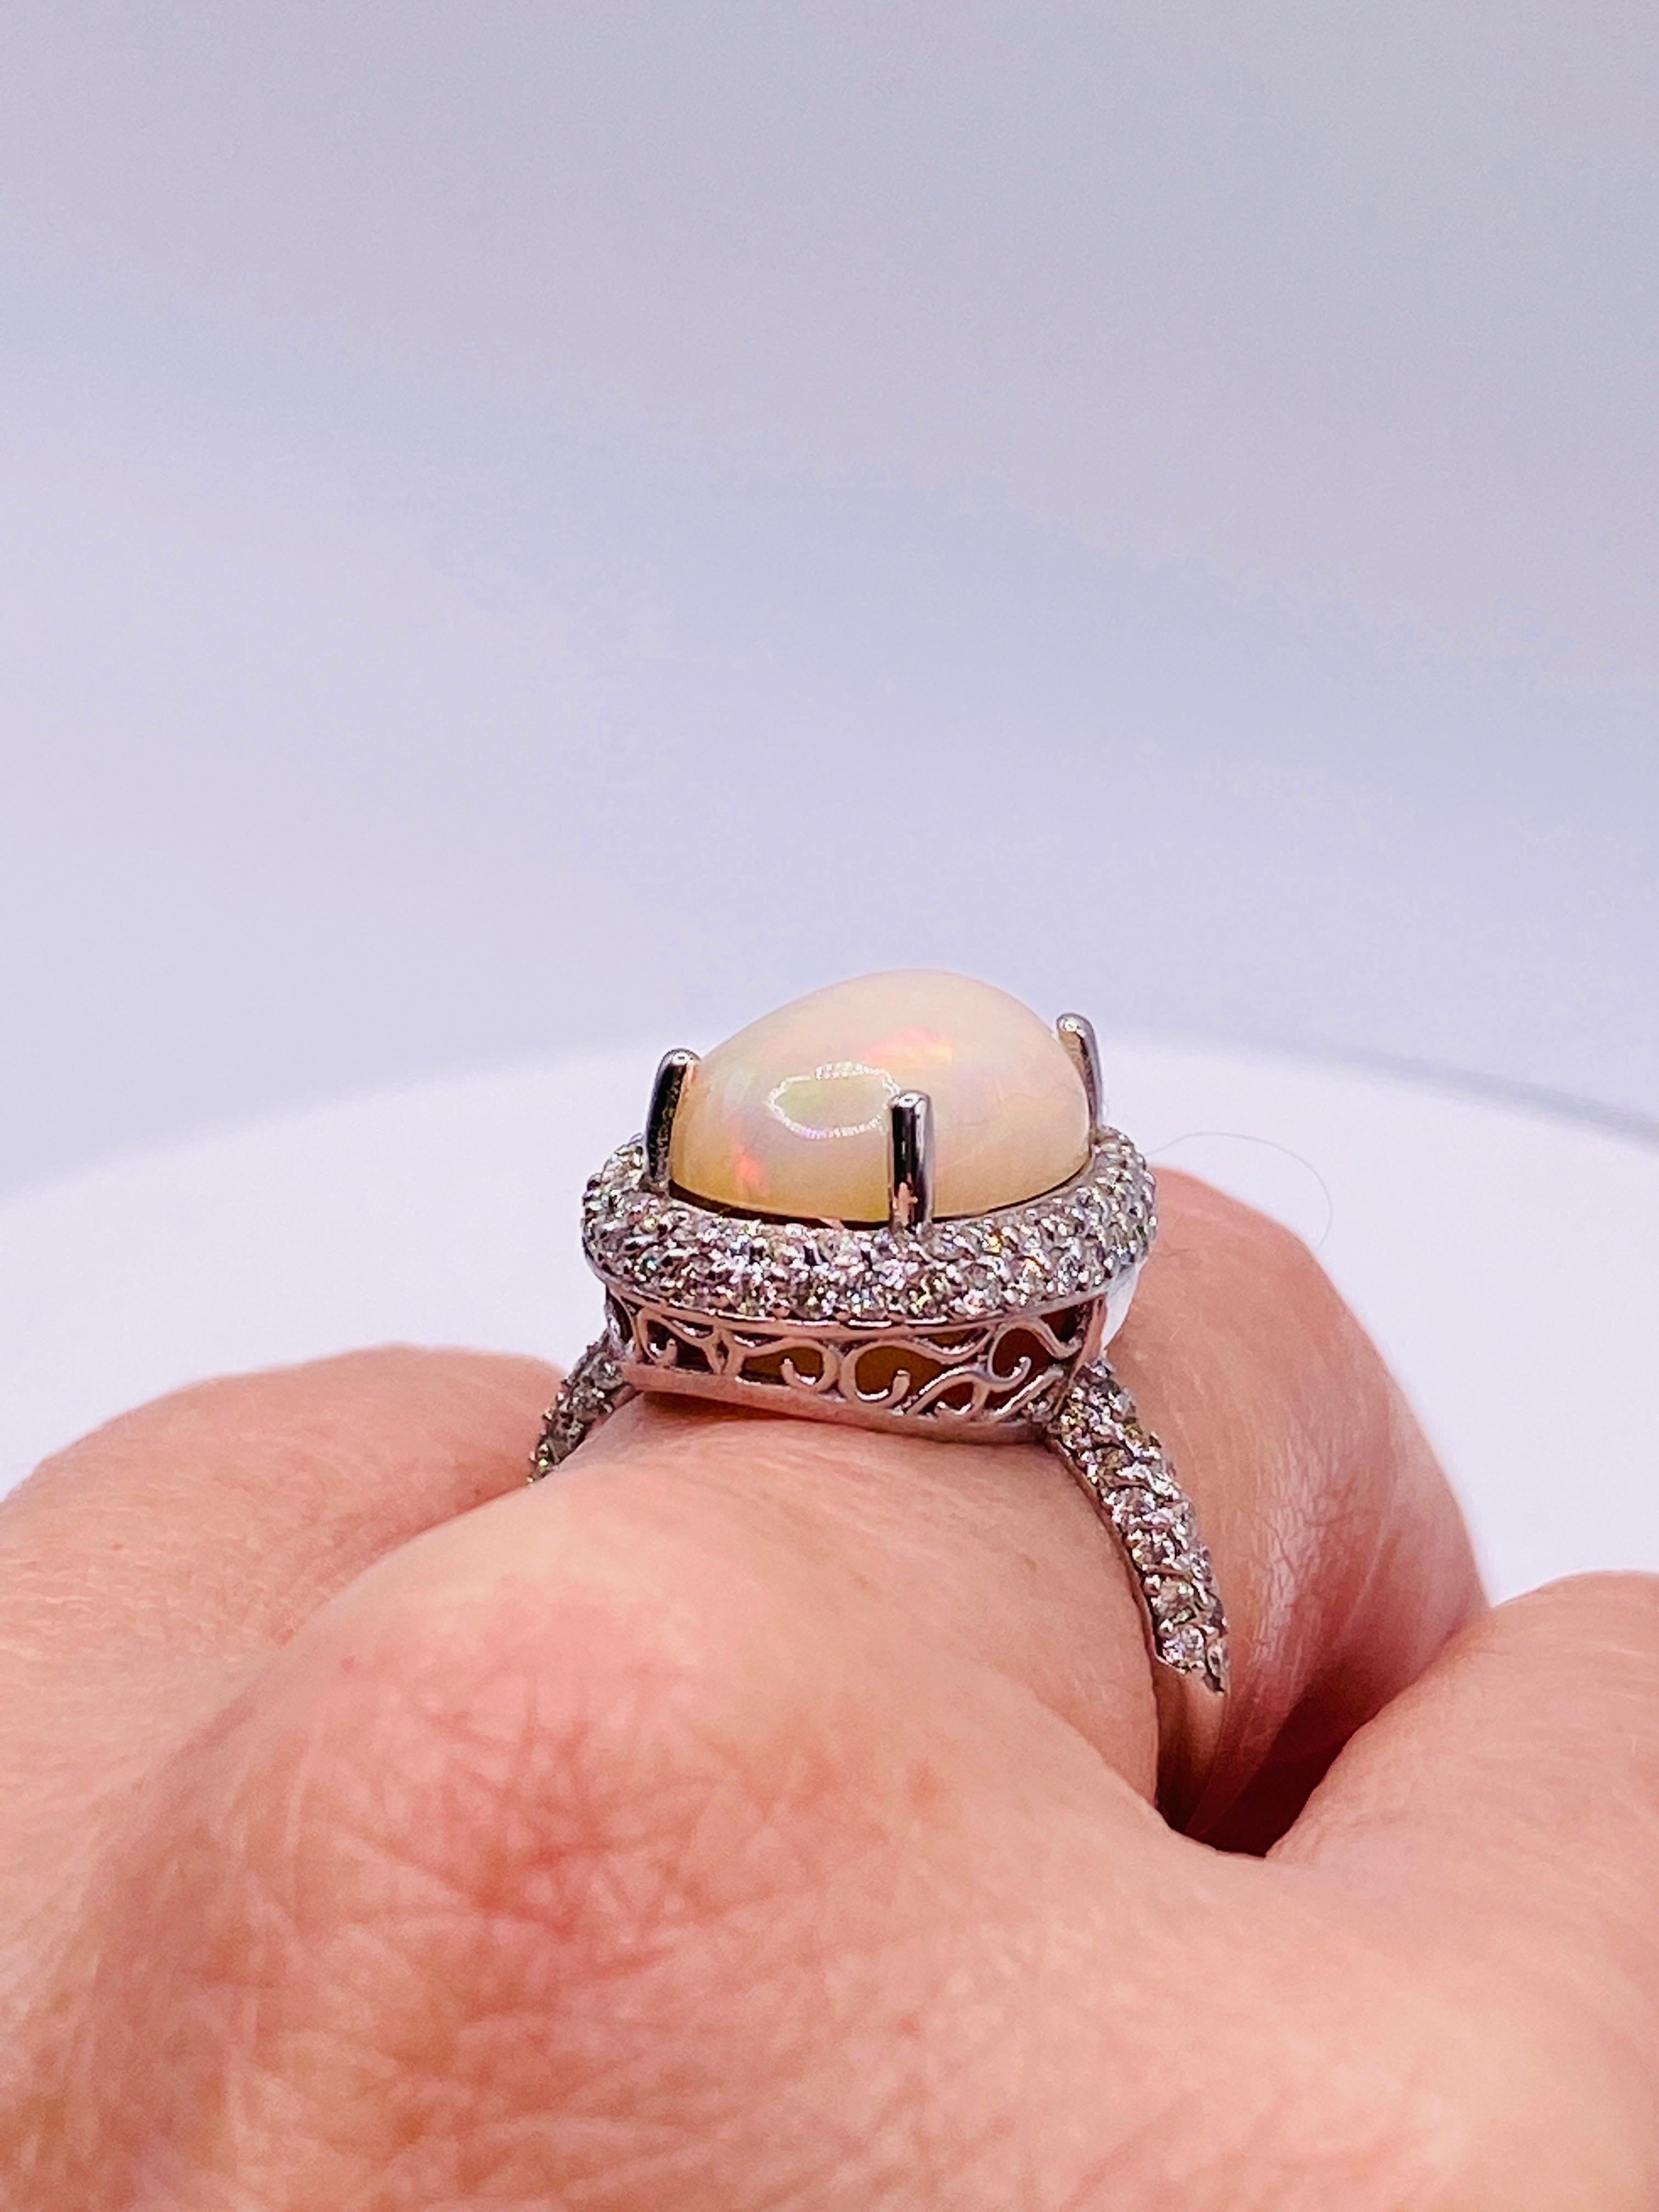 Cabochon 3.8 Carat Fire Opal and Diamond White Gold Ring